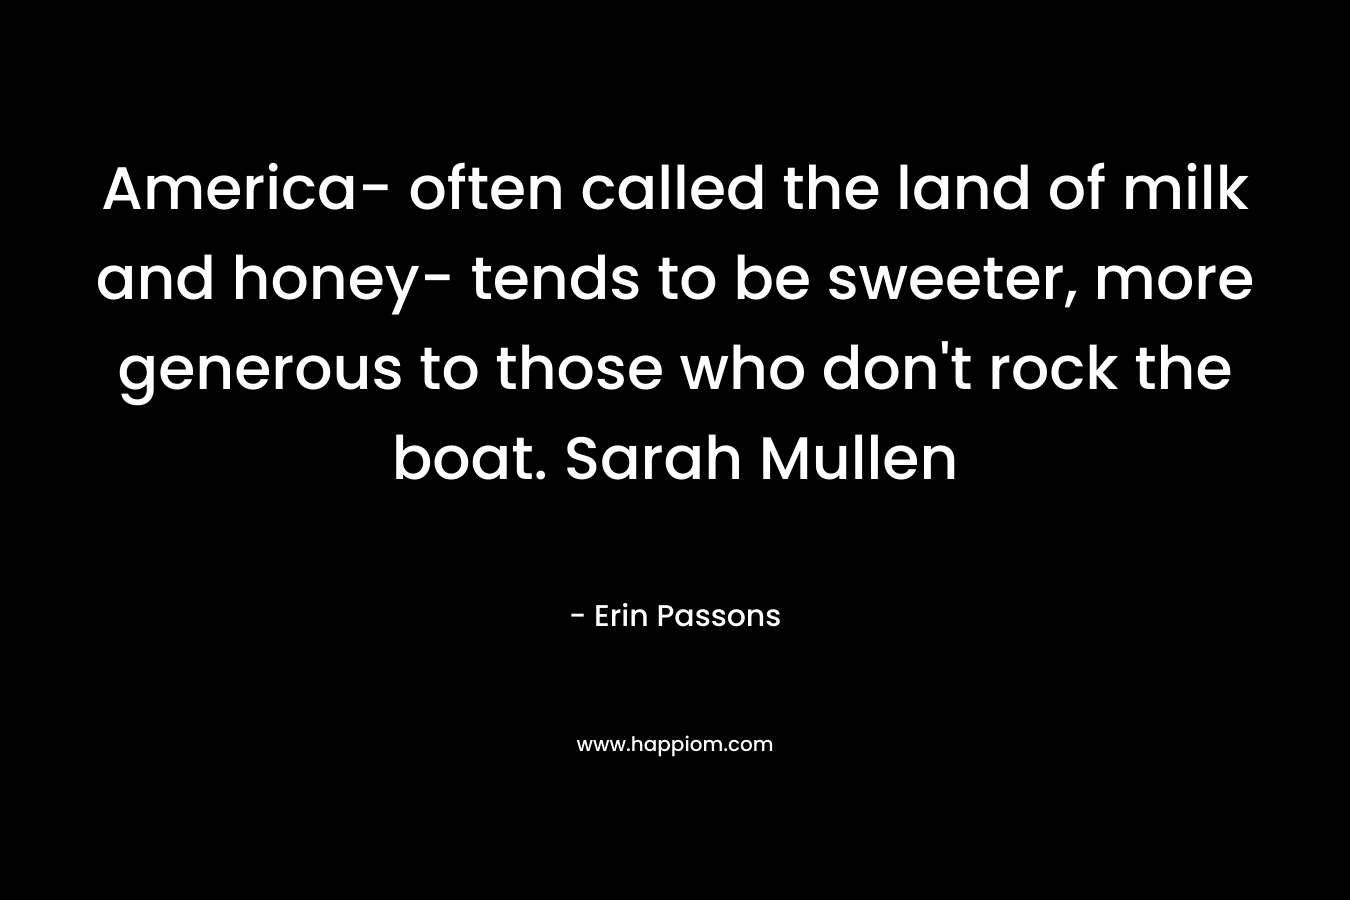 America- often called the land of milk and honey- tends to be sweeter, more generous to those who don't rock the boat. Sarah Mullen